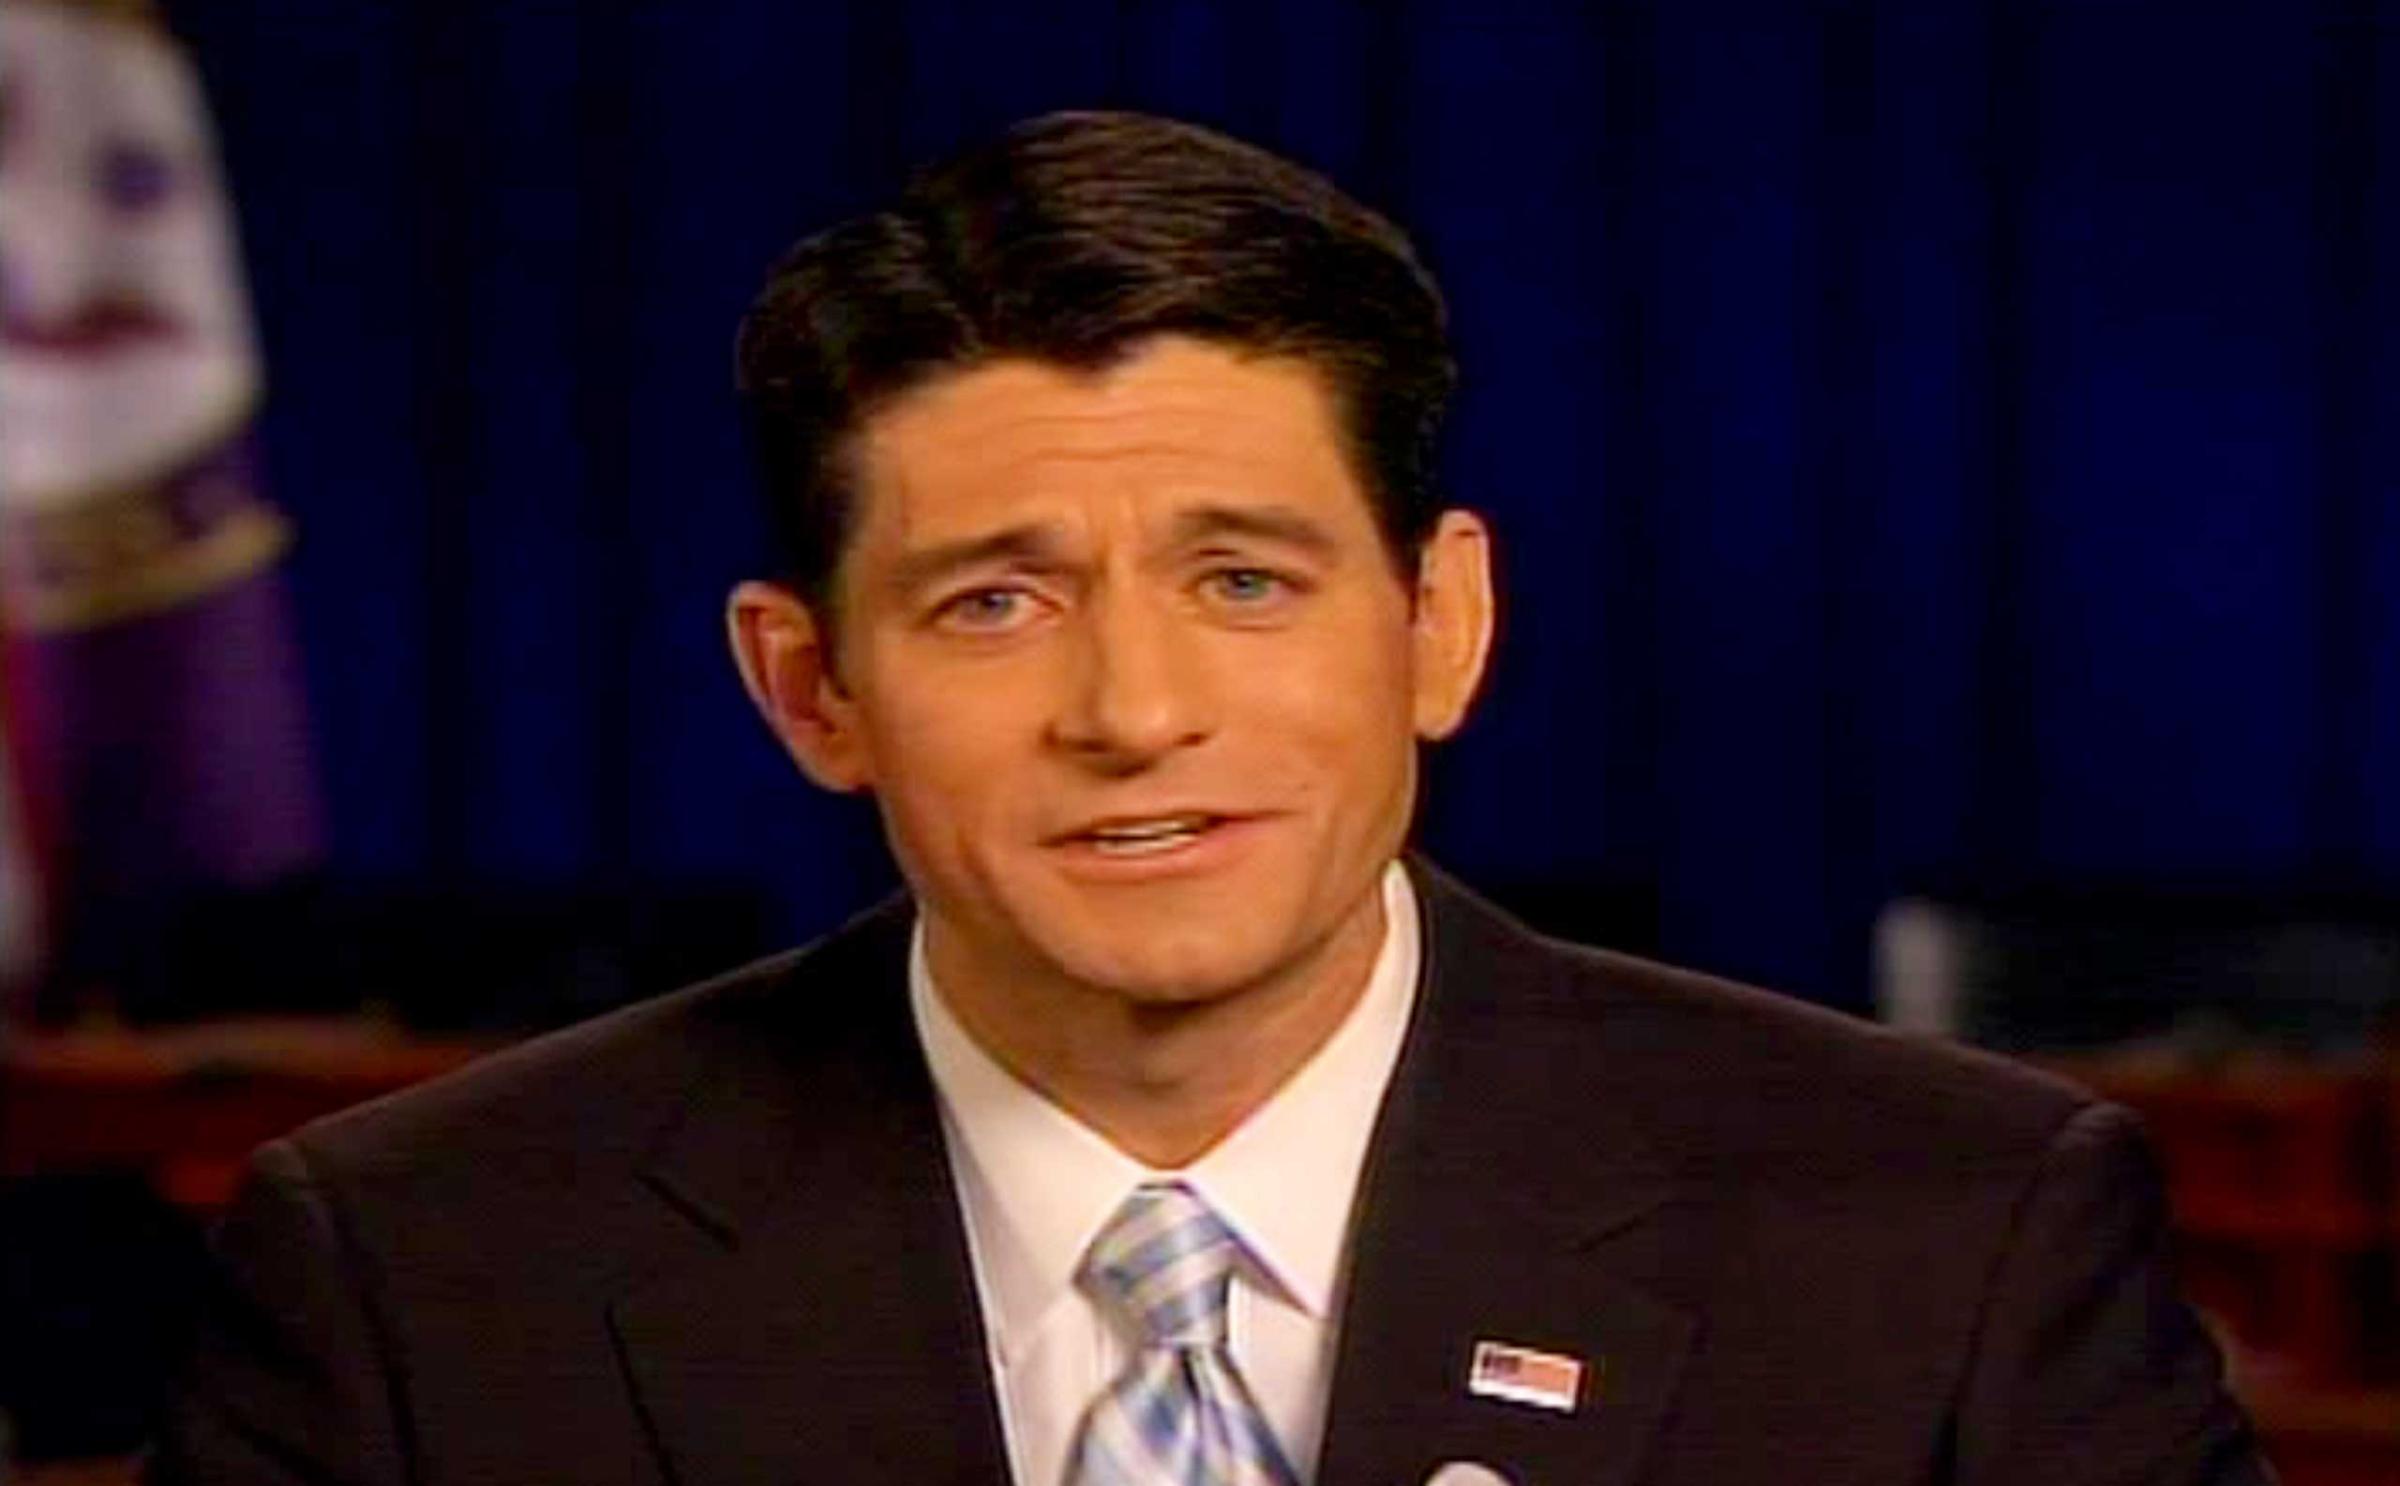 Paul Ryan State of the Union